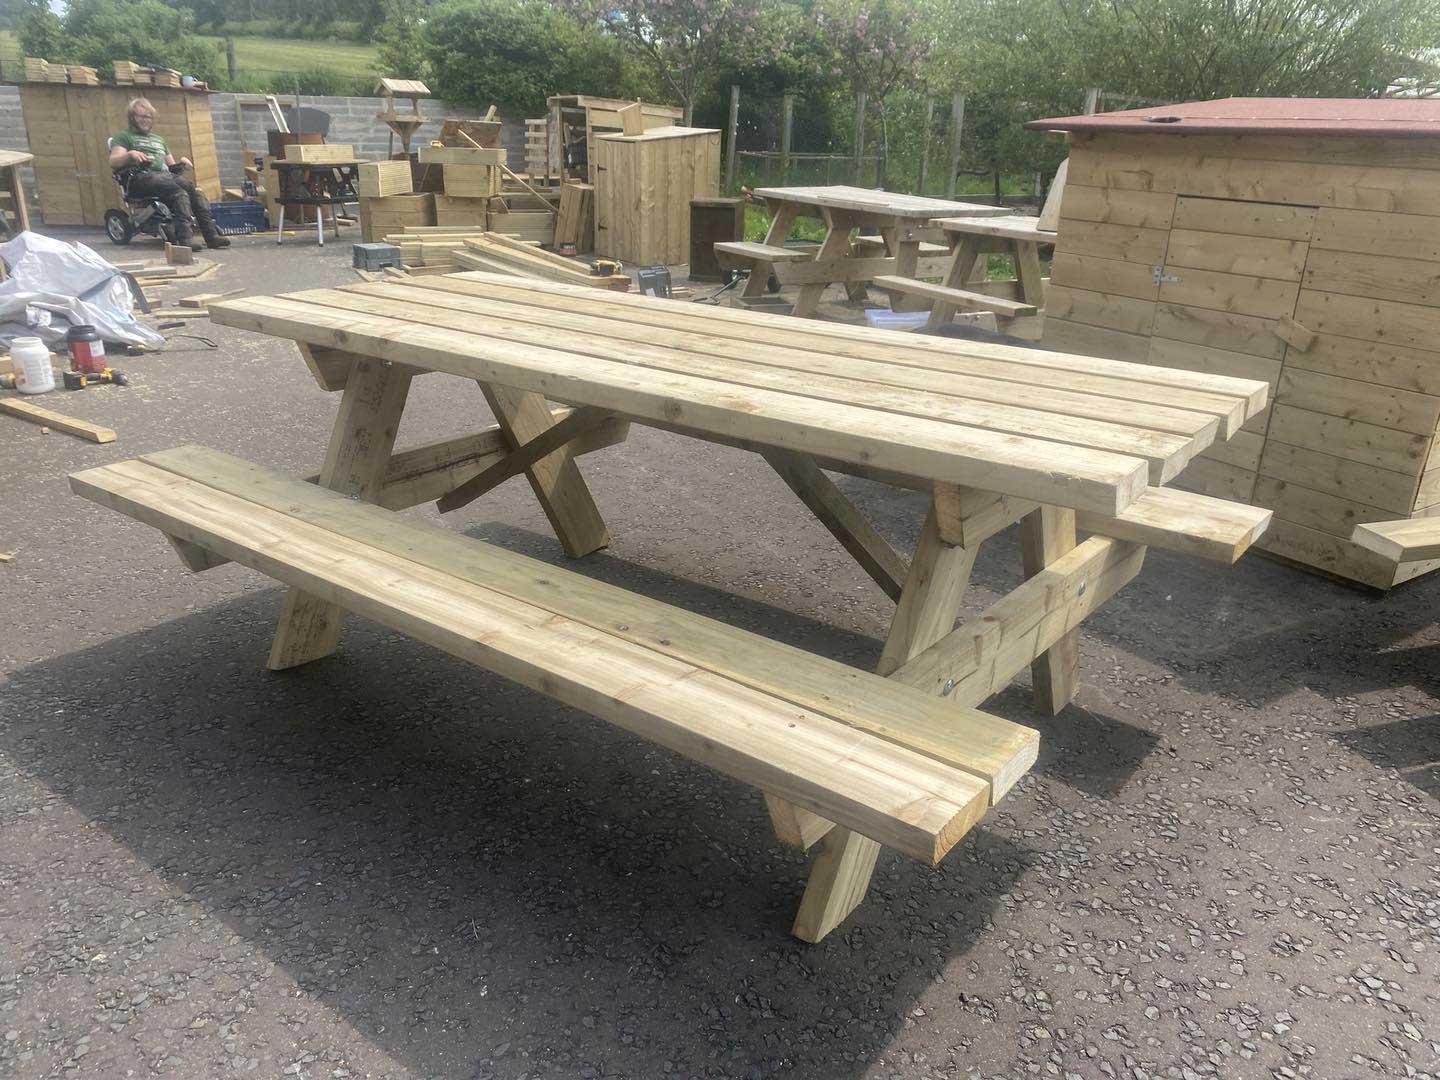 Kierons Woodworking Services picnic table in workshop yard